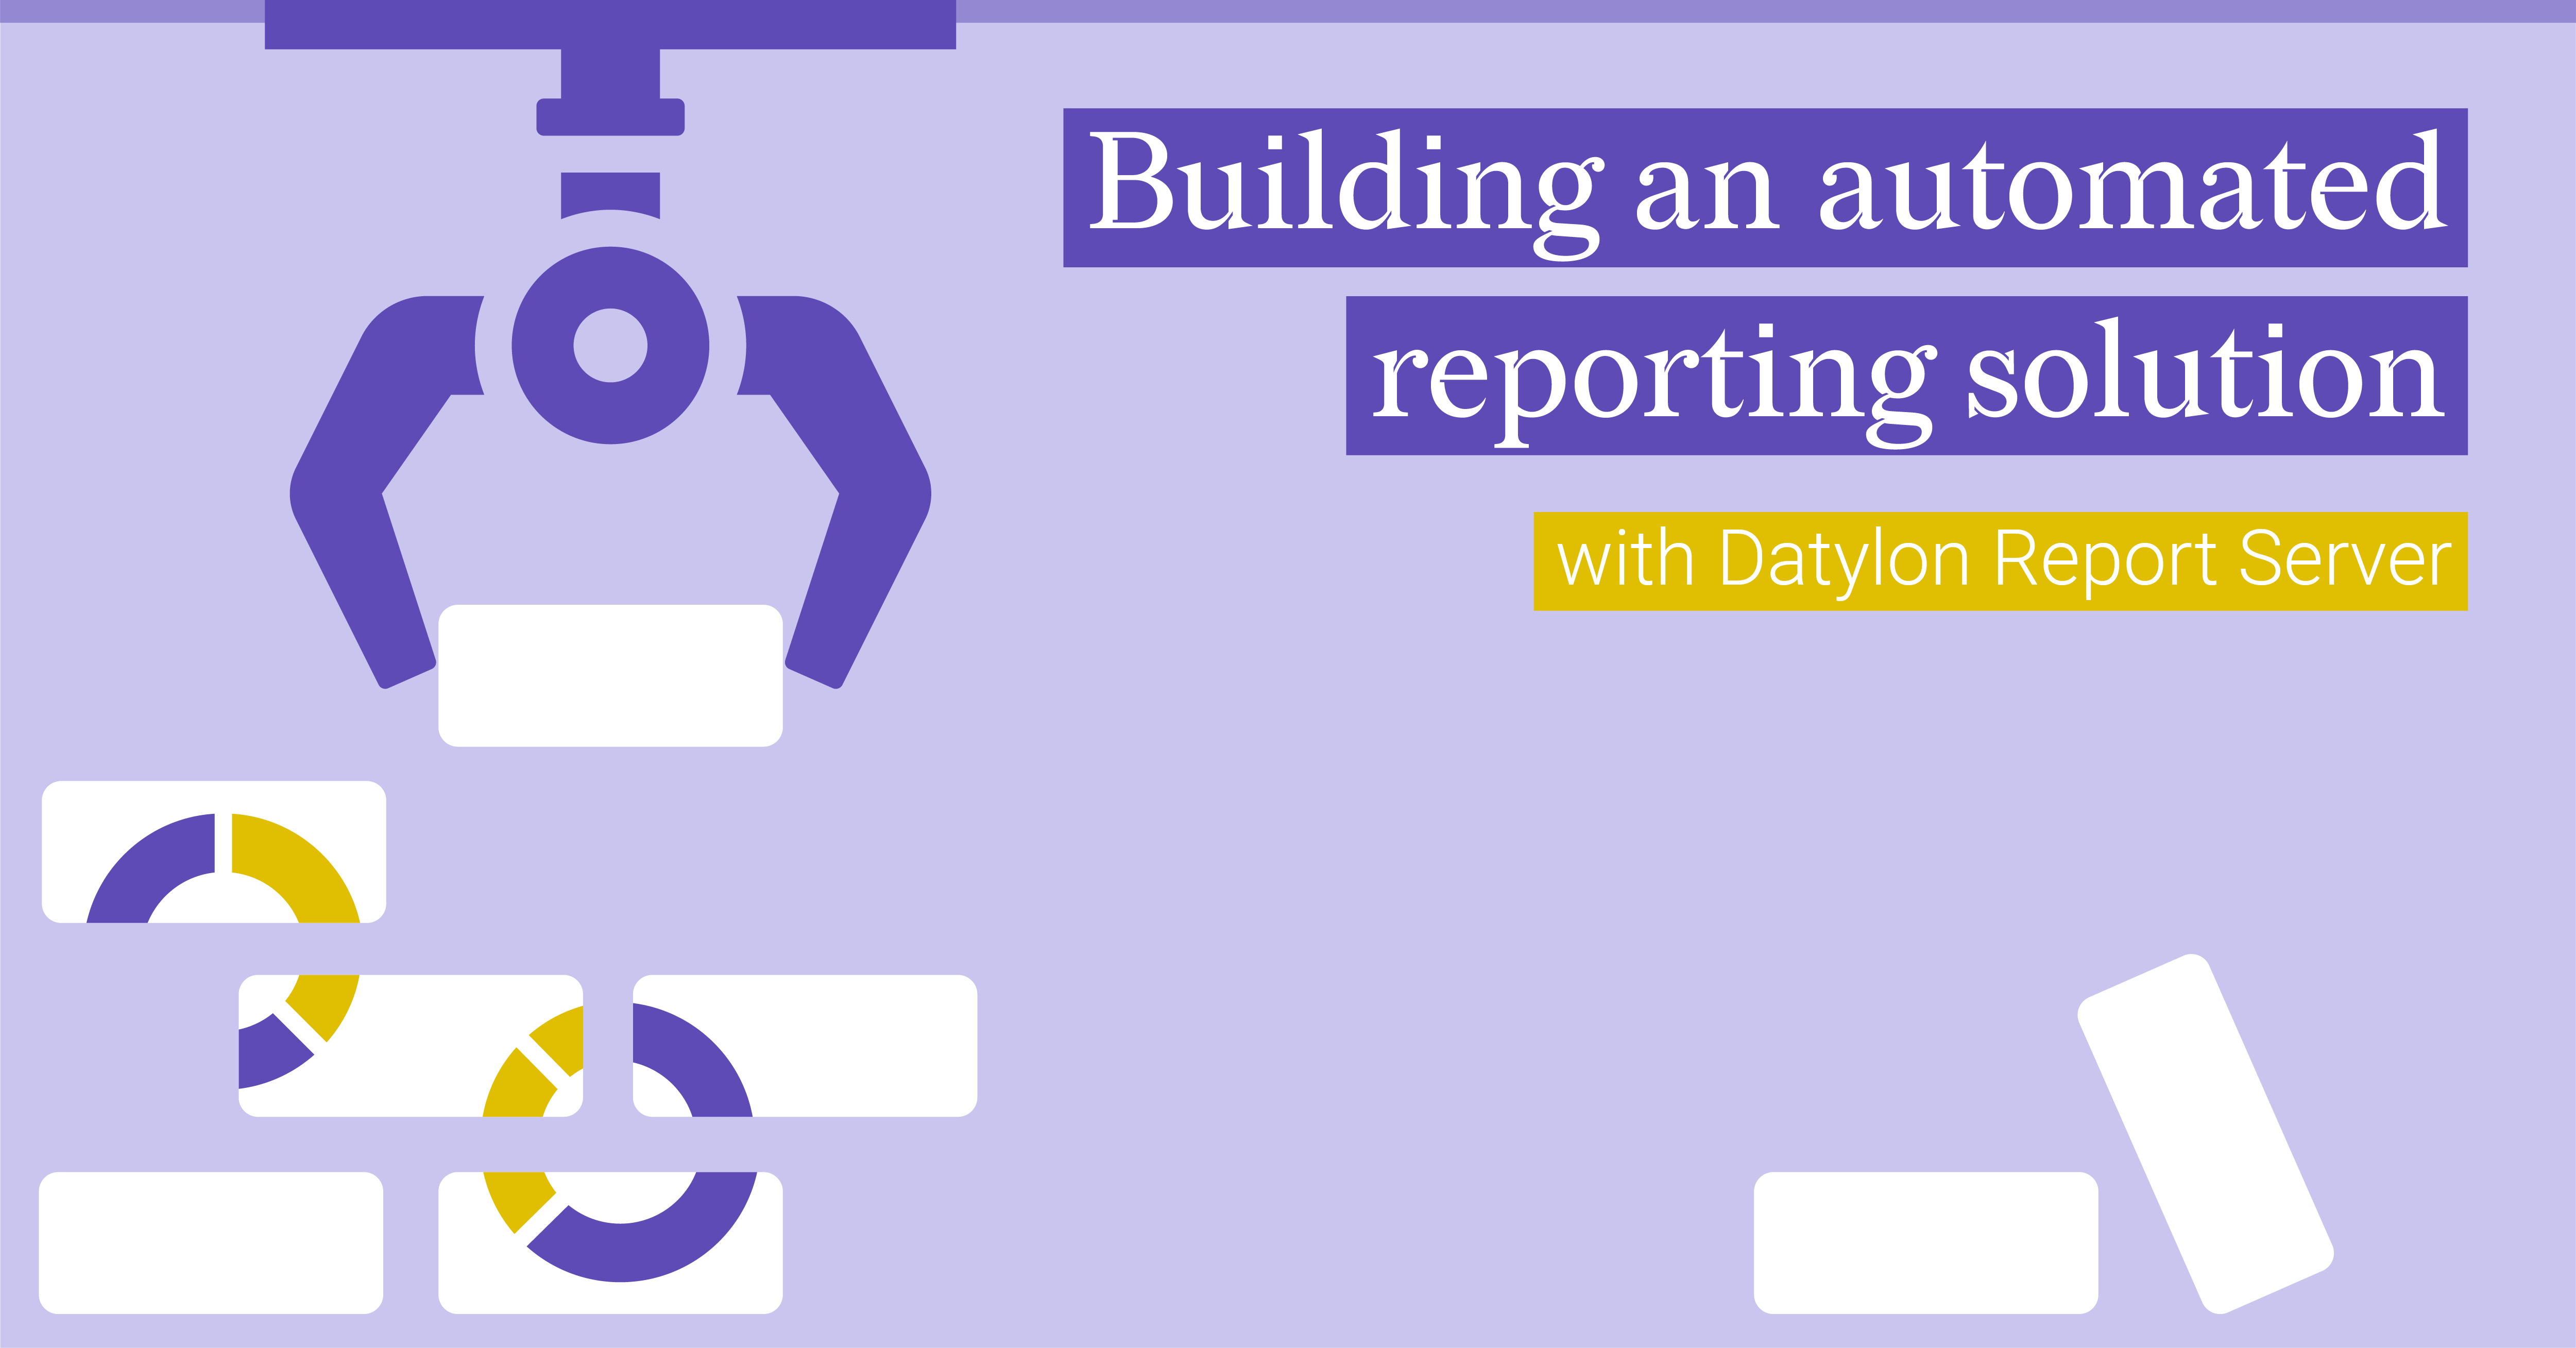 datylon-blog-building-automated-reporting-solution-server-report-featured-image-1200x628